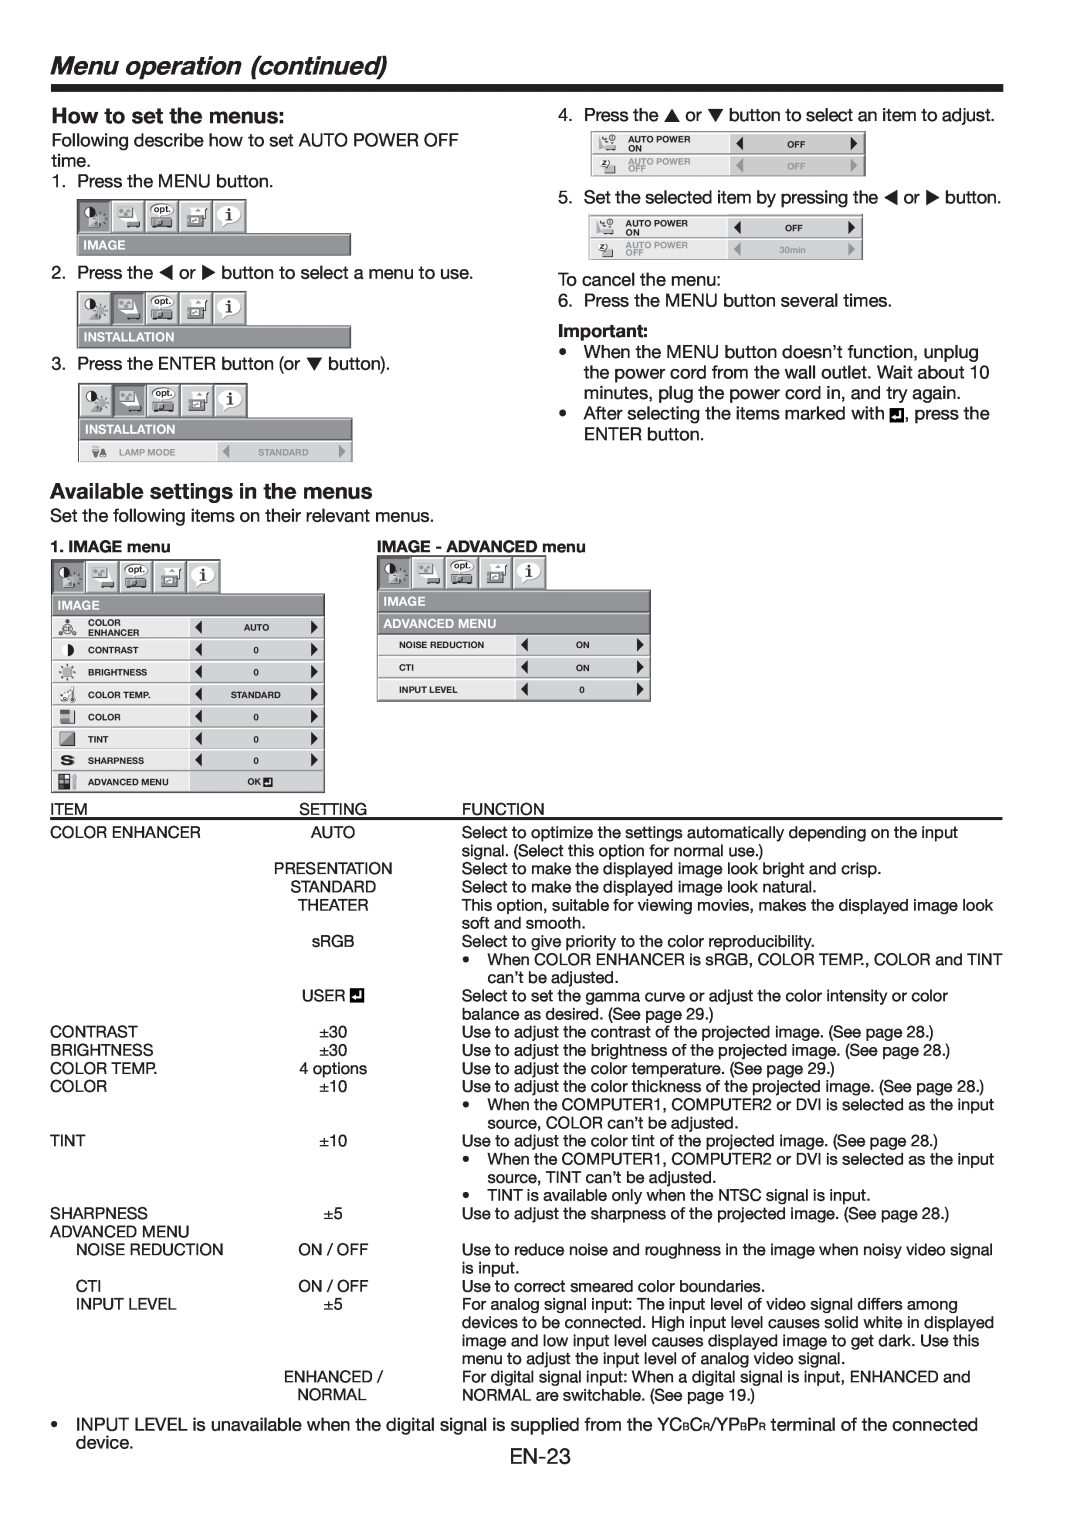 Mitsubishi Electronics FL6900U user manual Menu operation continued, How to set the menus, Available settings in the menus 